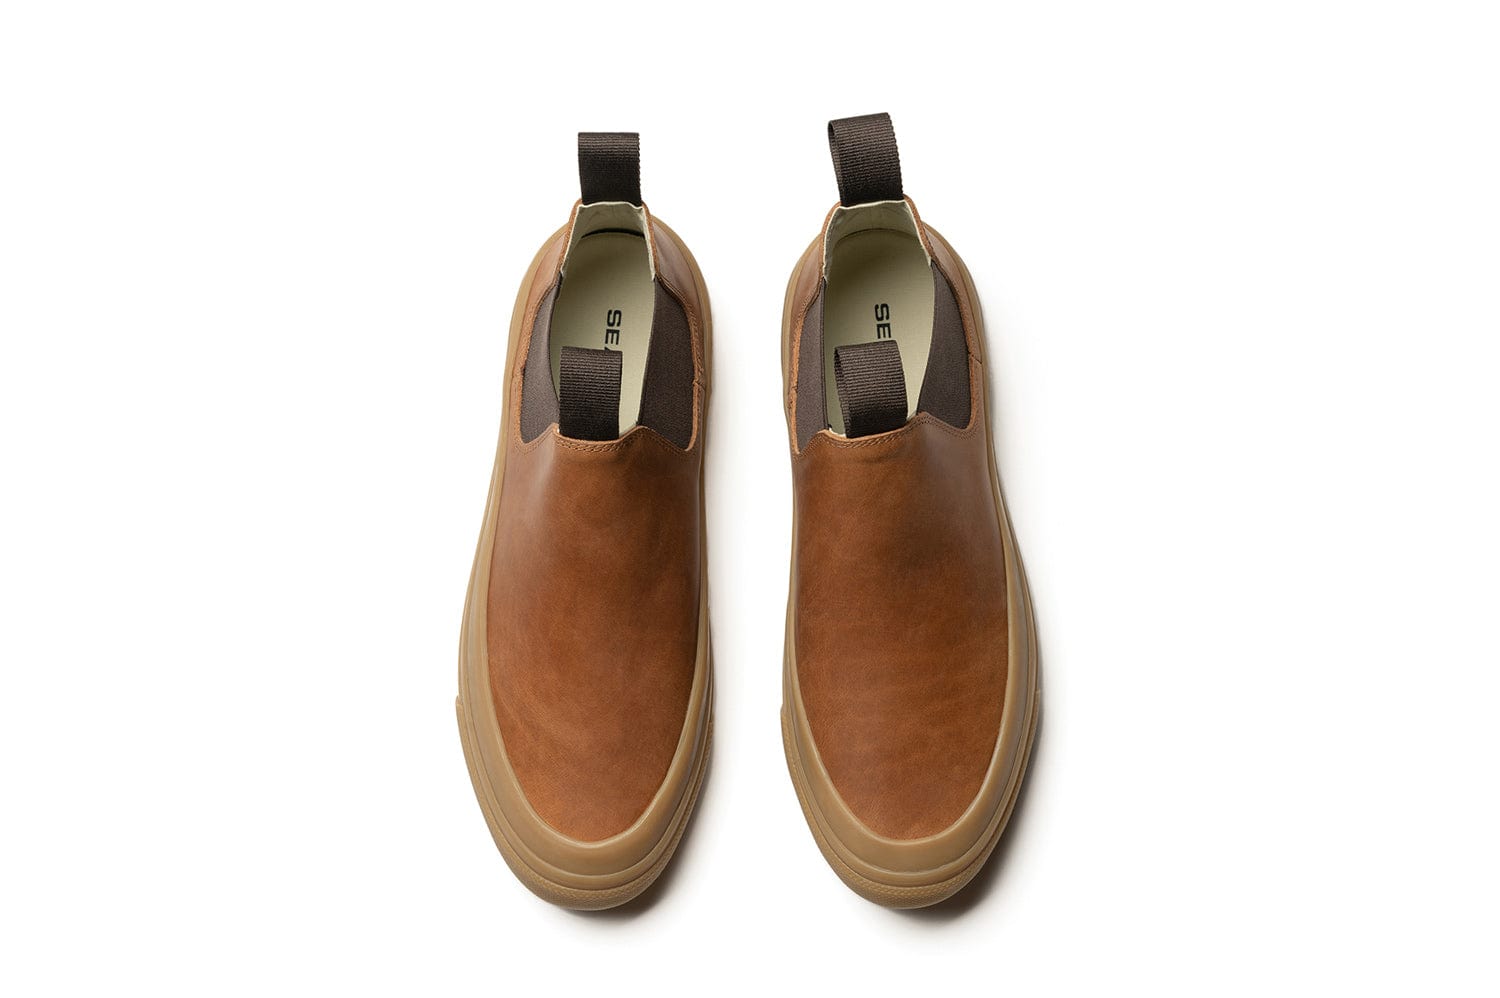 Top view of the cashew-colored SeaVees Boot showing rounded toe and elastic sides.